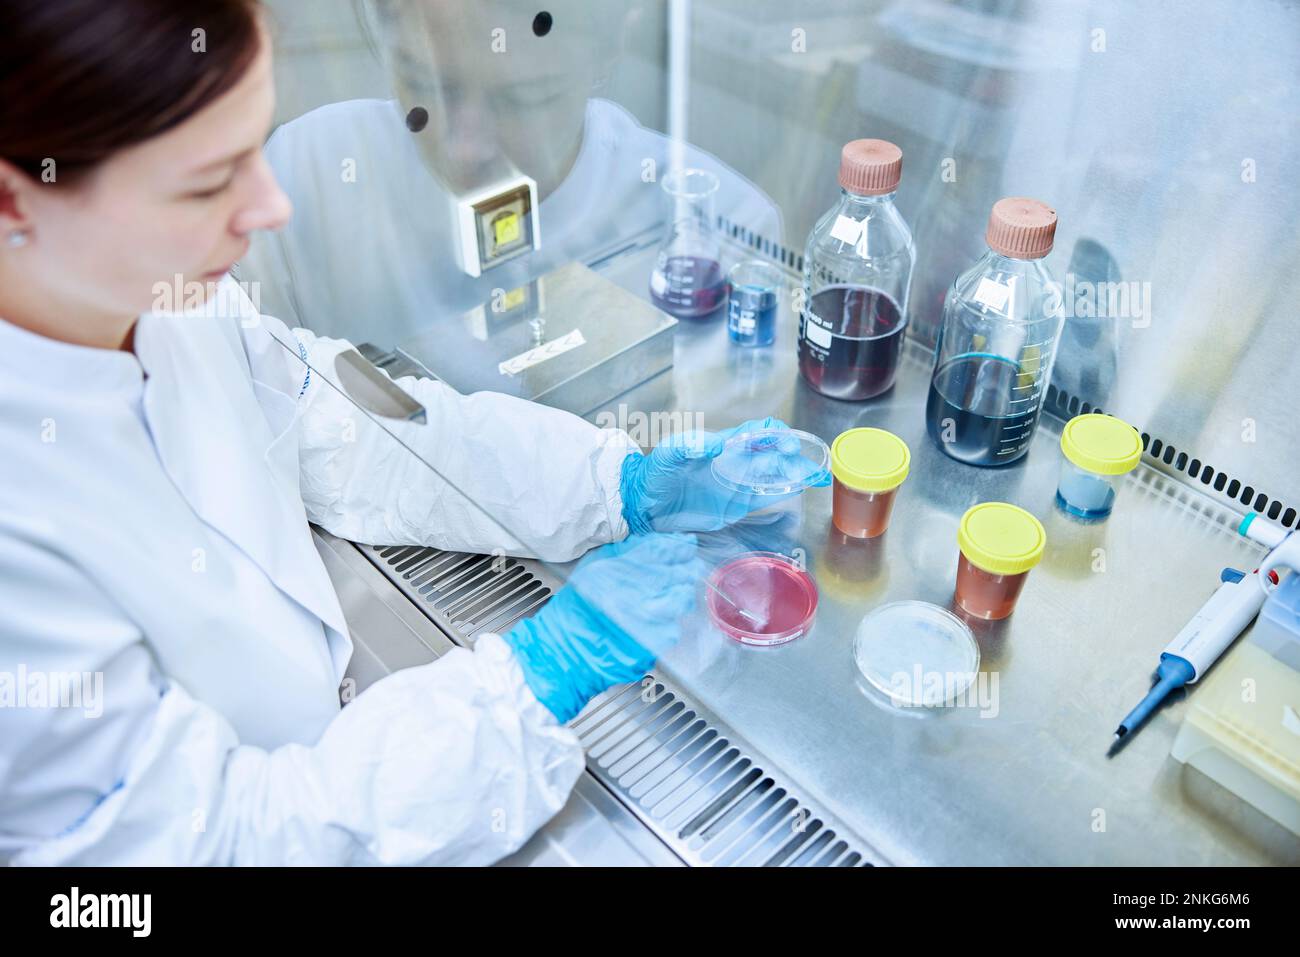 Female scientist testing in a microbiological lab Stock Photo